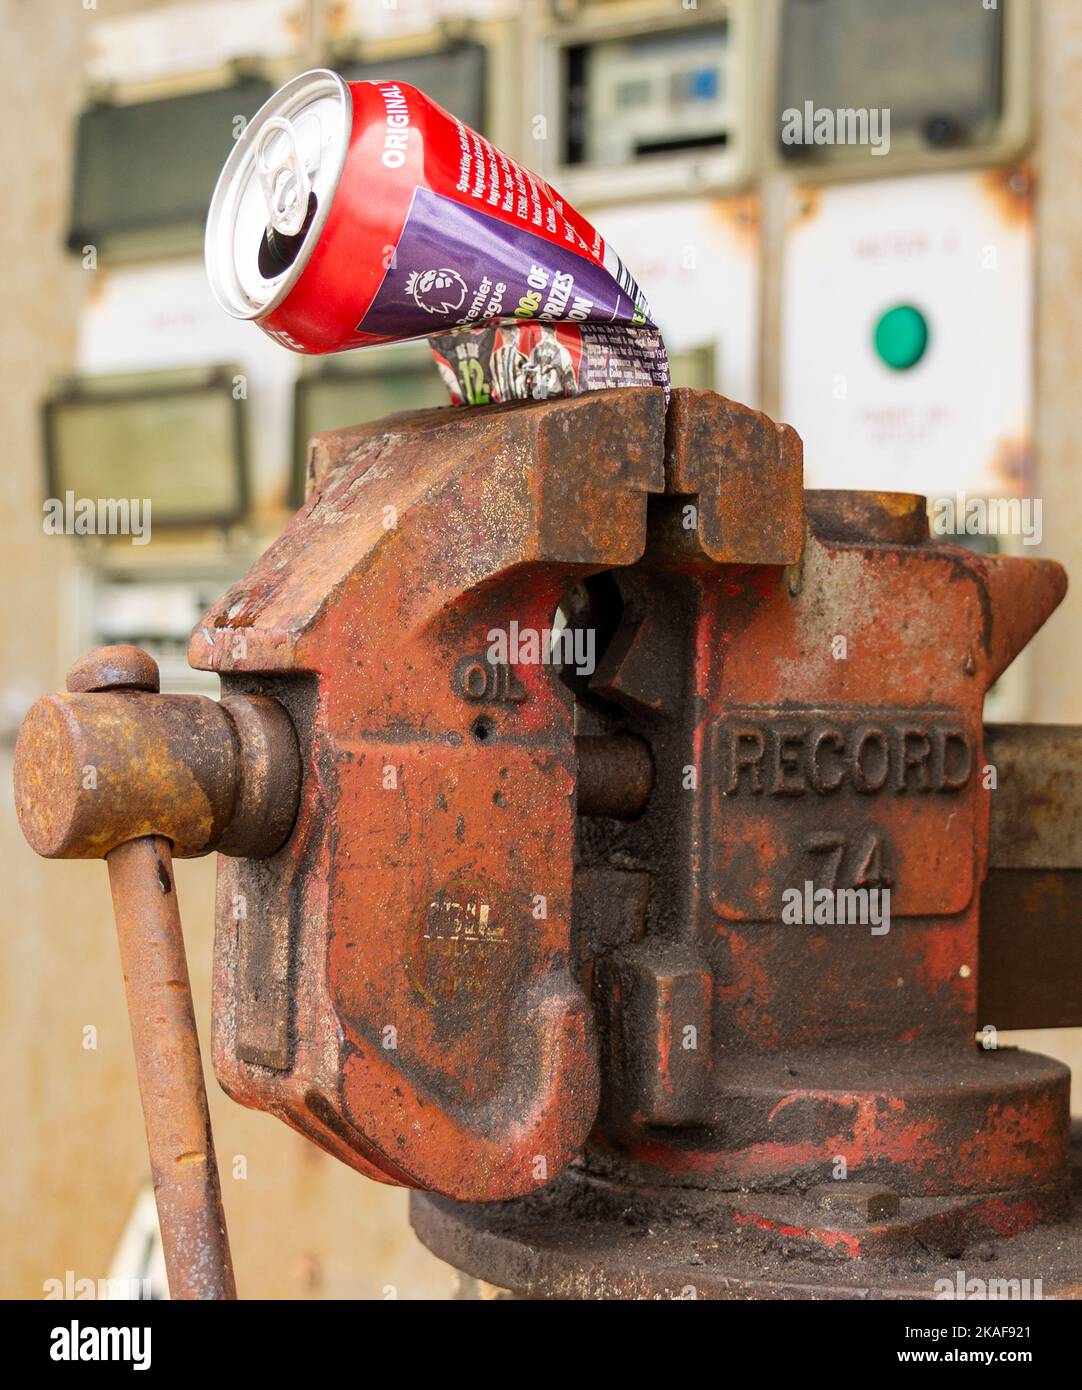 Record 74 Vice holding crushed tin can Stock Photo